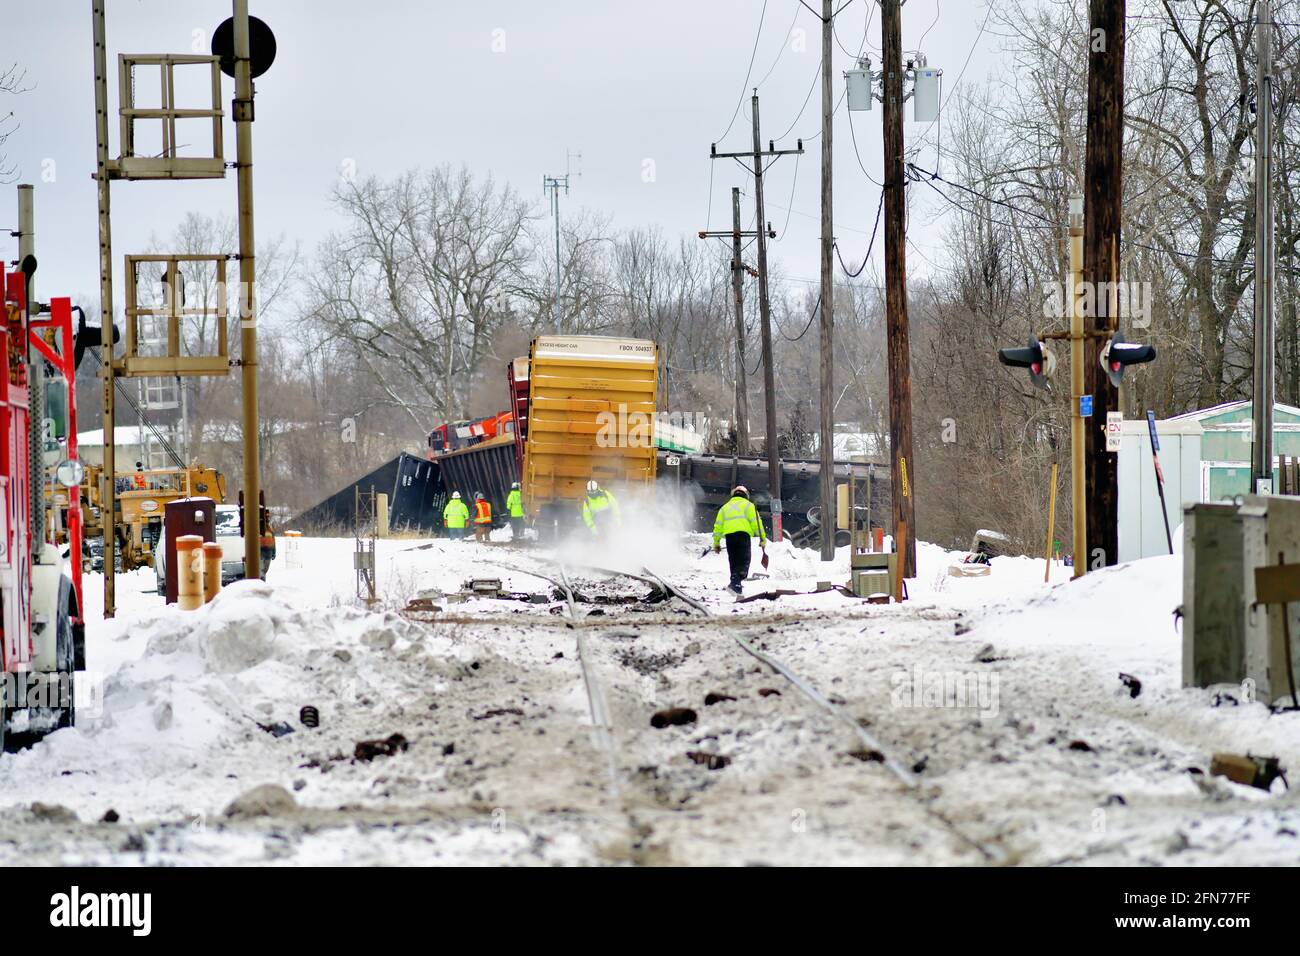 West Chicago, Illinois, USA. Workmen react to a Canadian National Railway freight train derailment that left freight cars scattered about the snow. Stock Photo